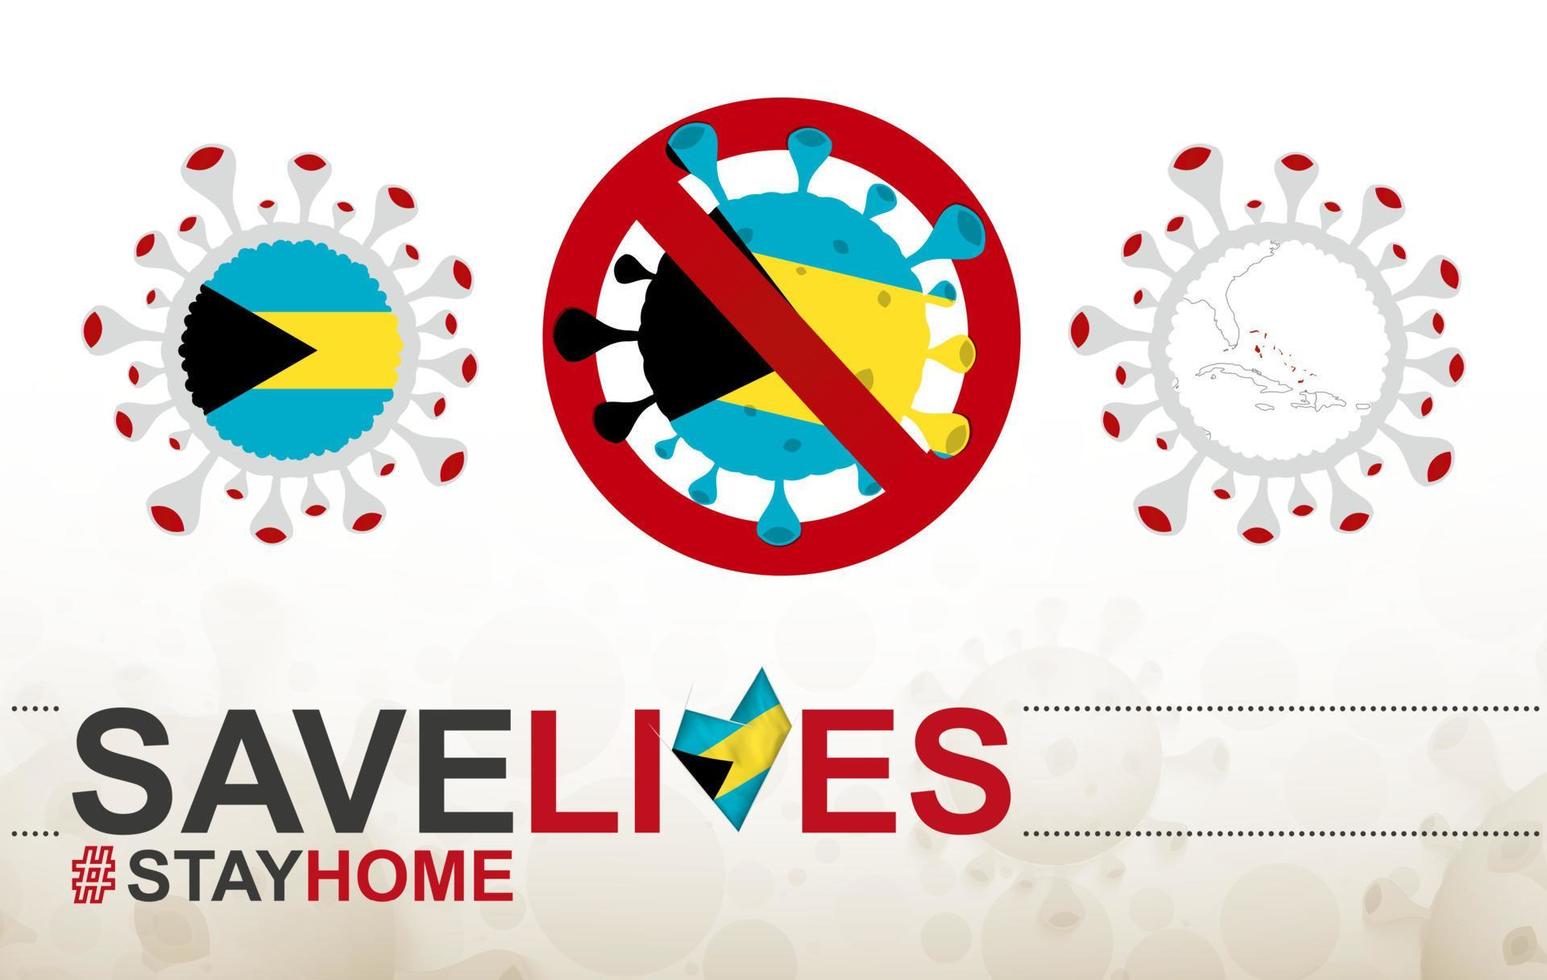 Coronavirus cell with The Bahamas flag and map. Stop COVID-19 sign, slogan save lives stay home with flag of The Bahamas vector